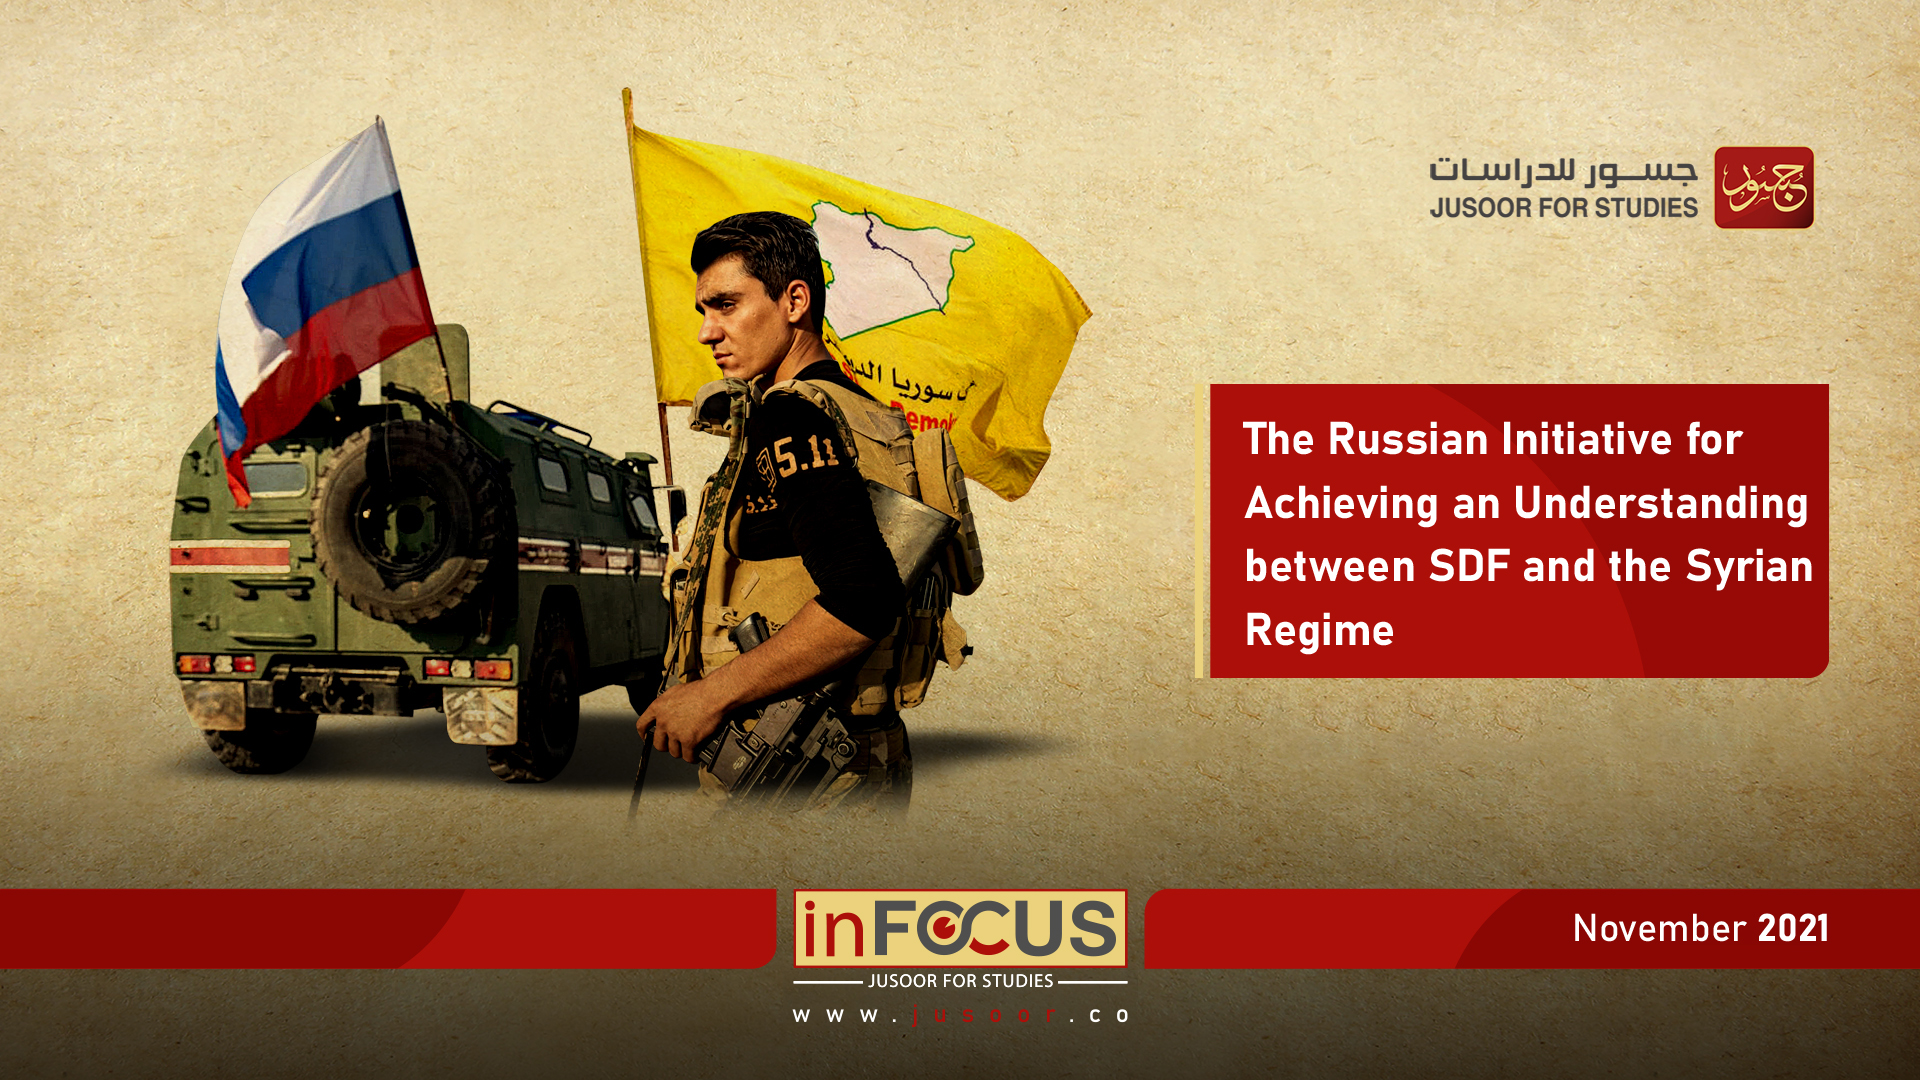 The Russian Initiative for Achieving an Understanding between SDF and the Syrian Regime